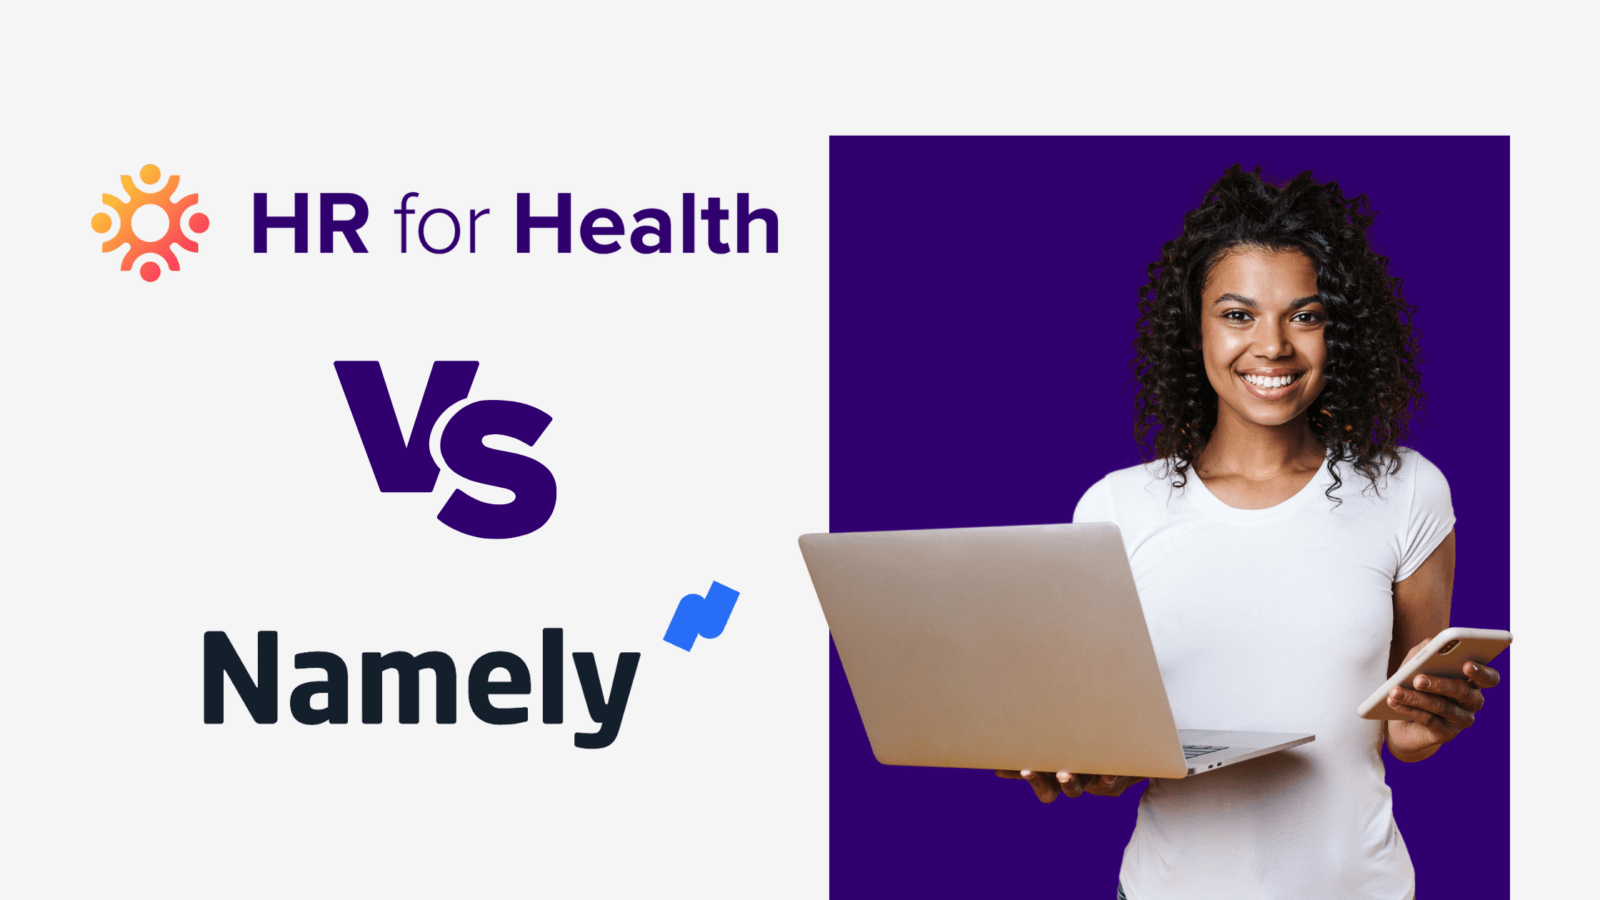 HR for Health Software vs. Namely: An Overview